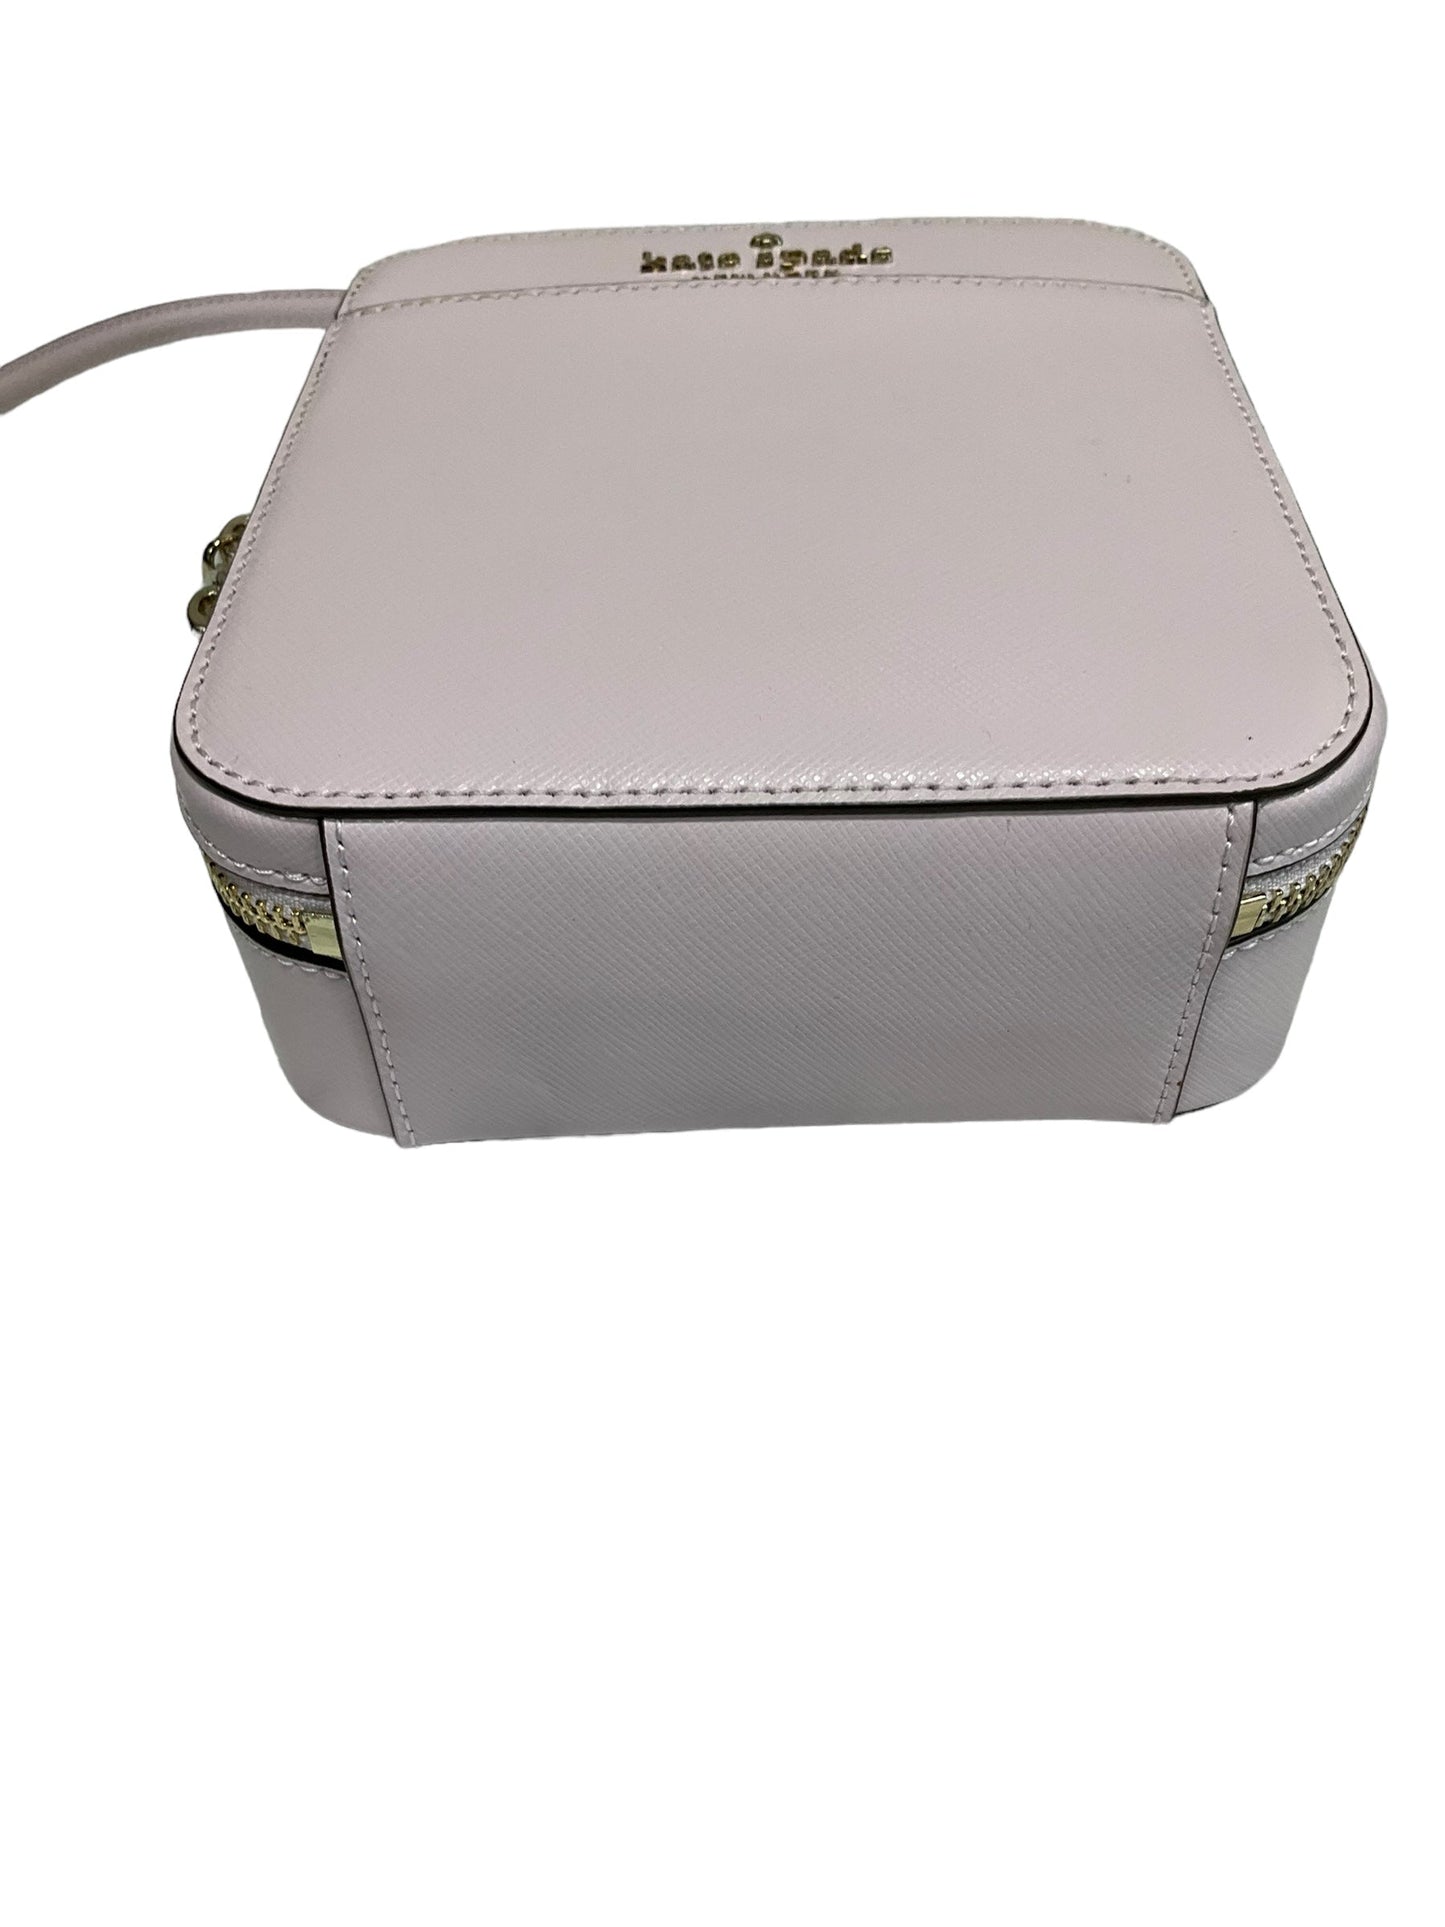 Crossbody Leather Kate Spade, Size Small